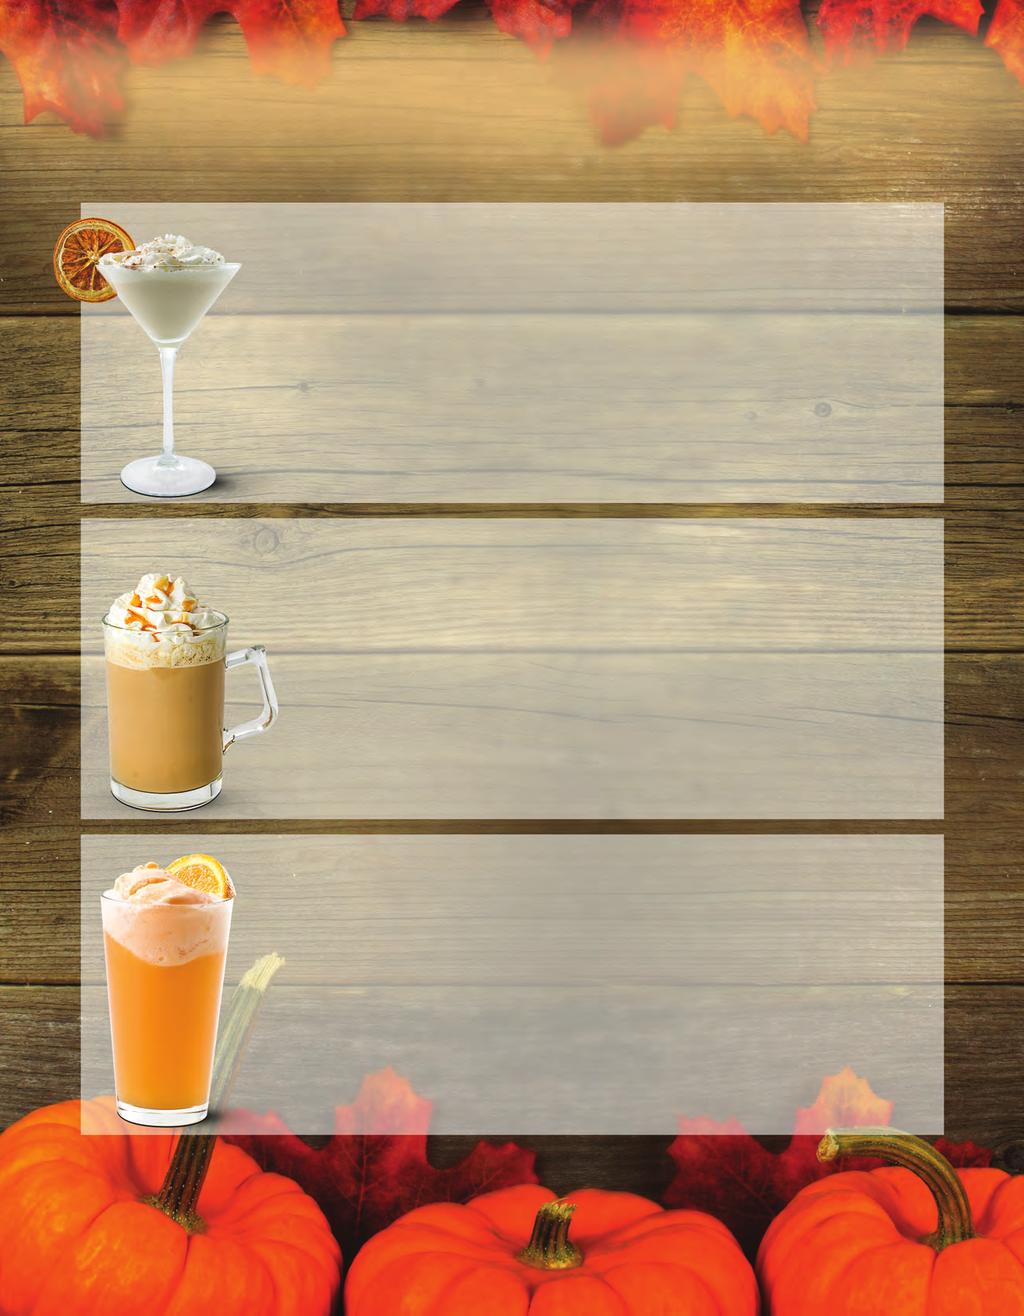 Pumpkin season never tasted better. Pick your favorite or try them all! Substitute any Monin pumpkin flavoring to create these delicious fall recipes. PUMPKIN SPICE MARTINI Glass size: 7 oz.